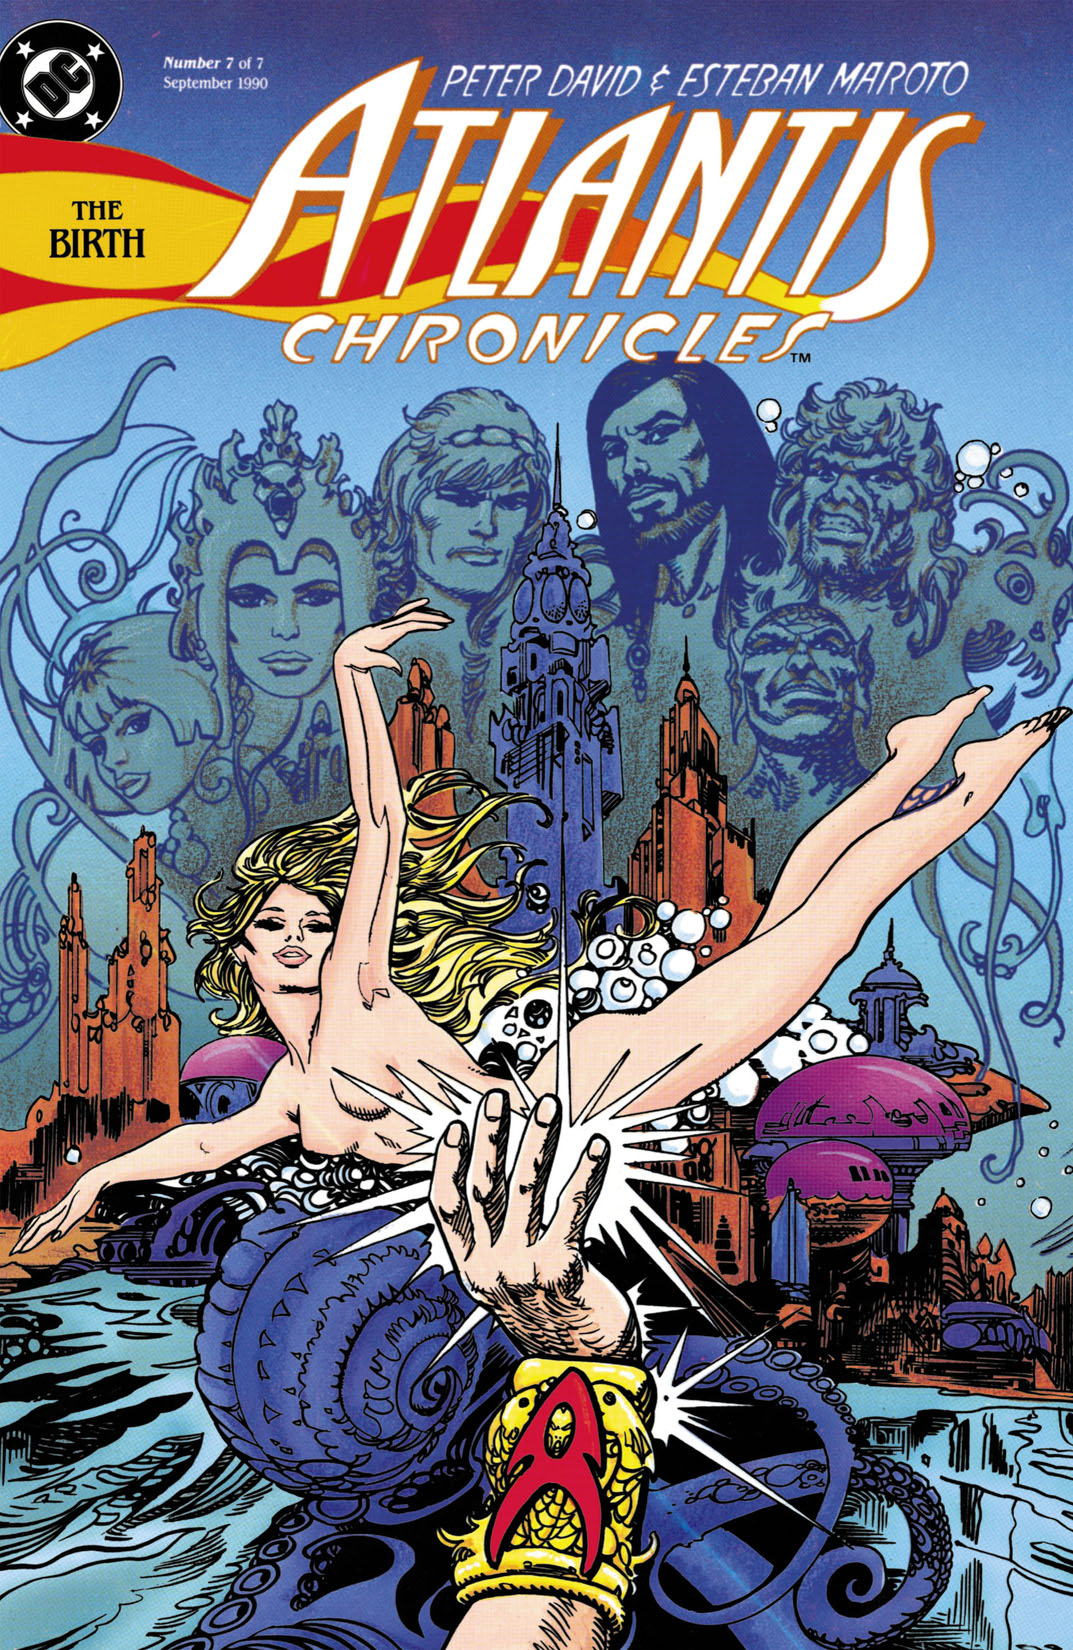 Atlantis Chronicles #7 preview images